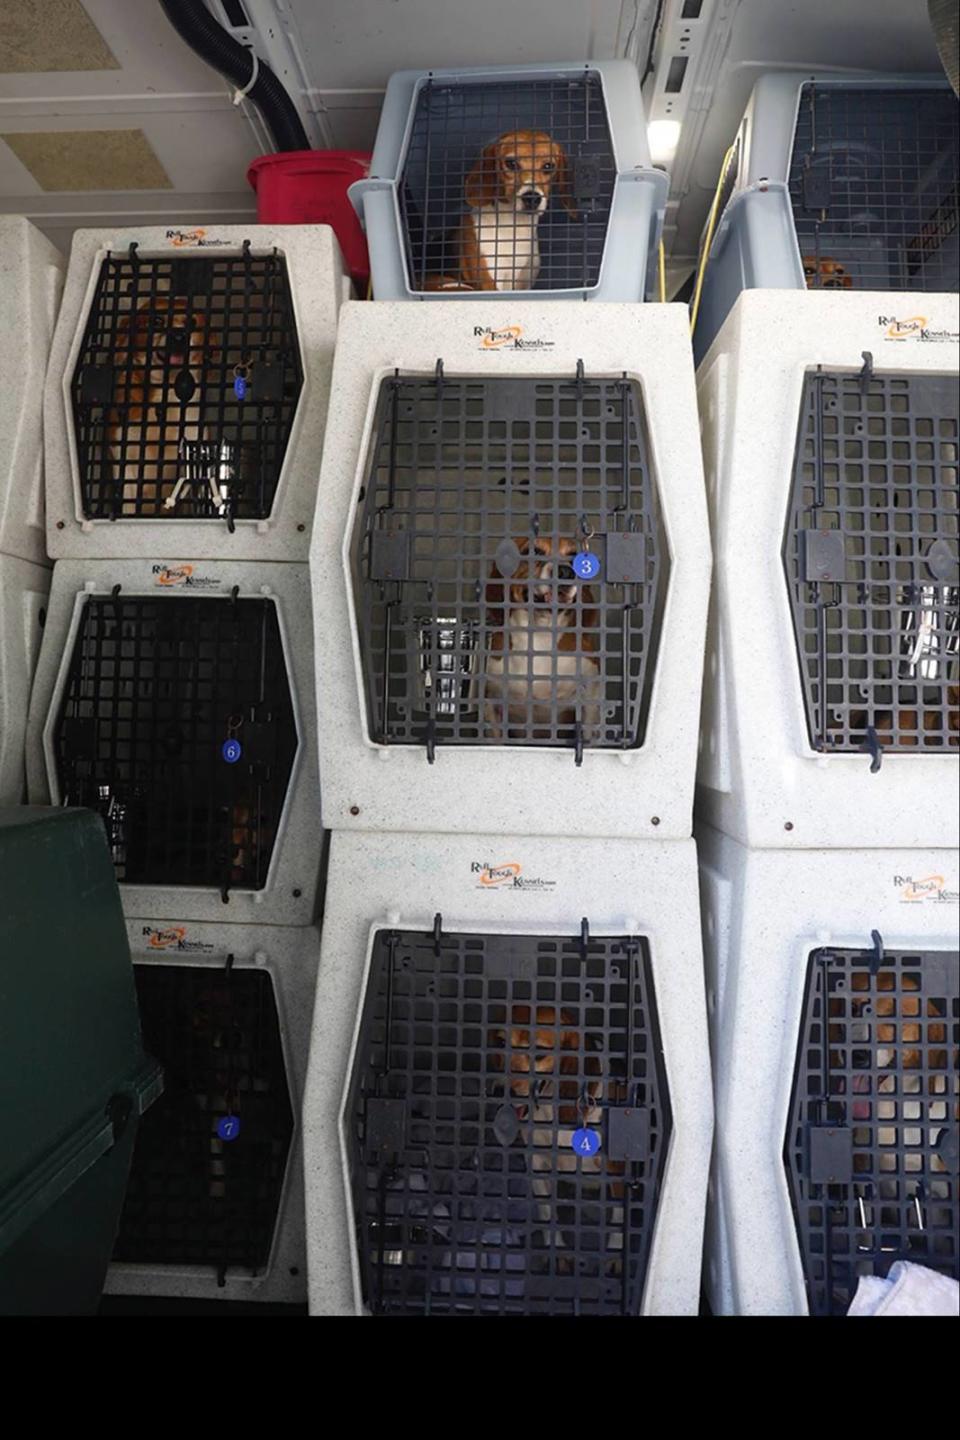 15 of the 4,000 beagles rescued from a Virginia research facility are being transported to Michigan by the Humane Society of Huron Valley's "Love Train." They are expected to reach Ann Arbor on Monday night.